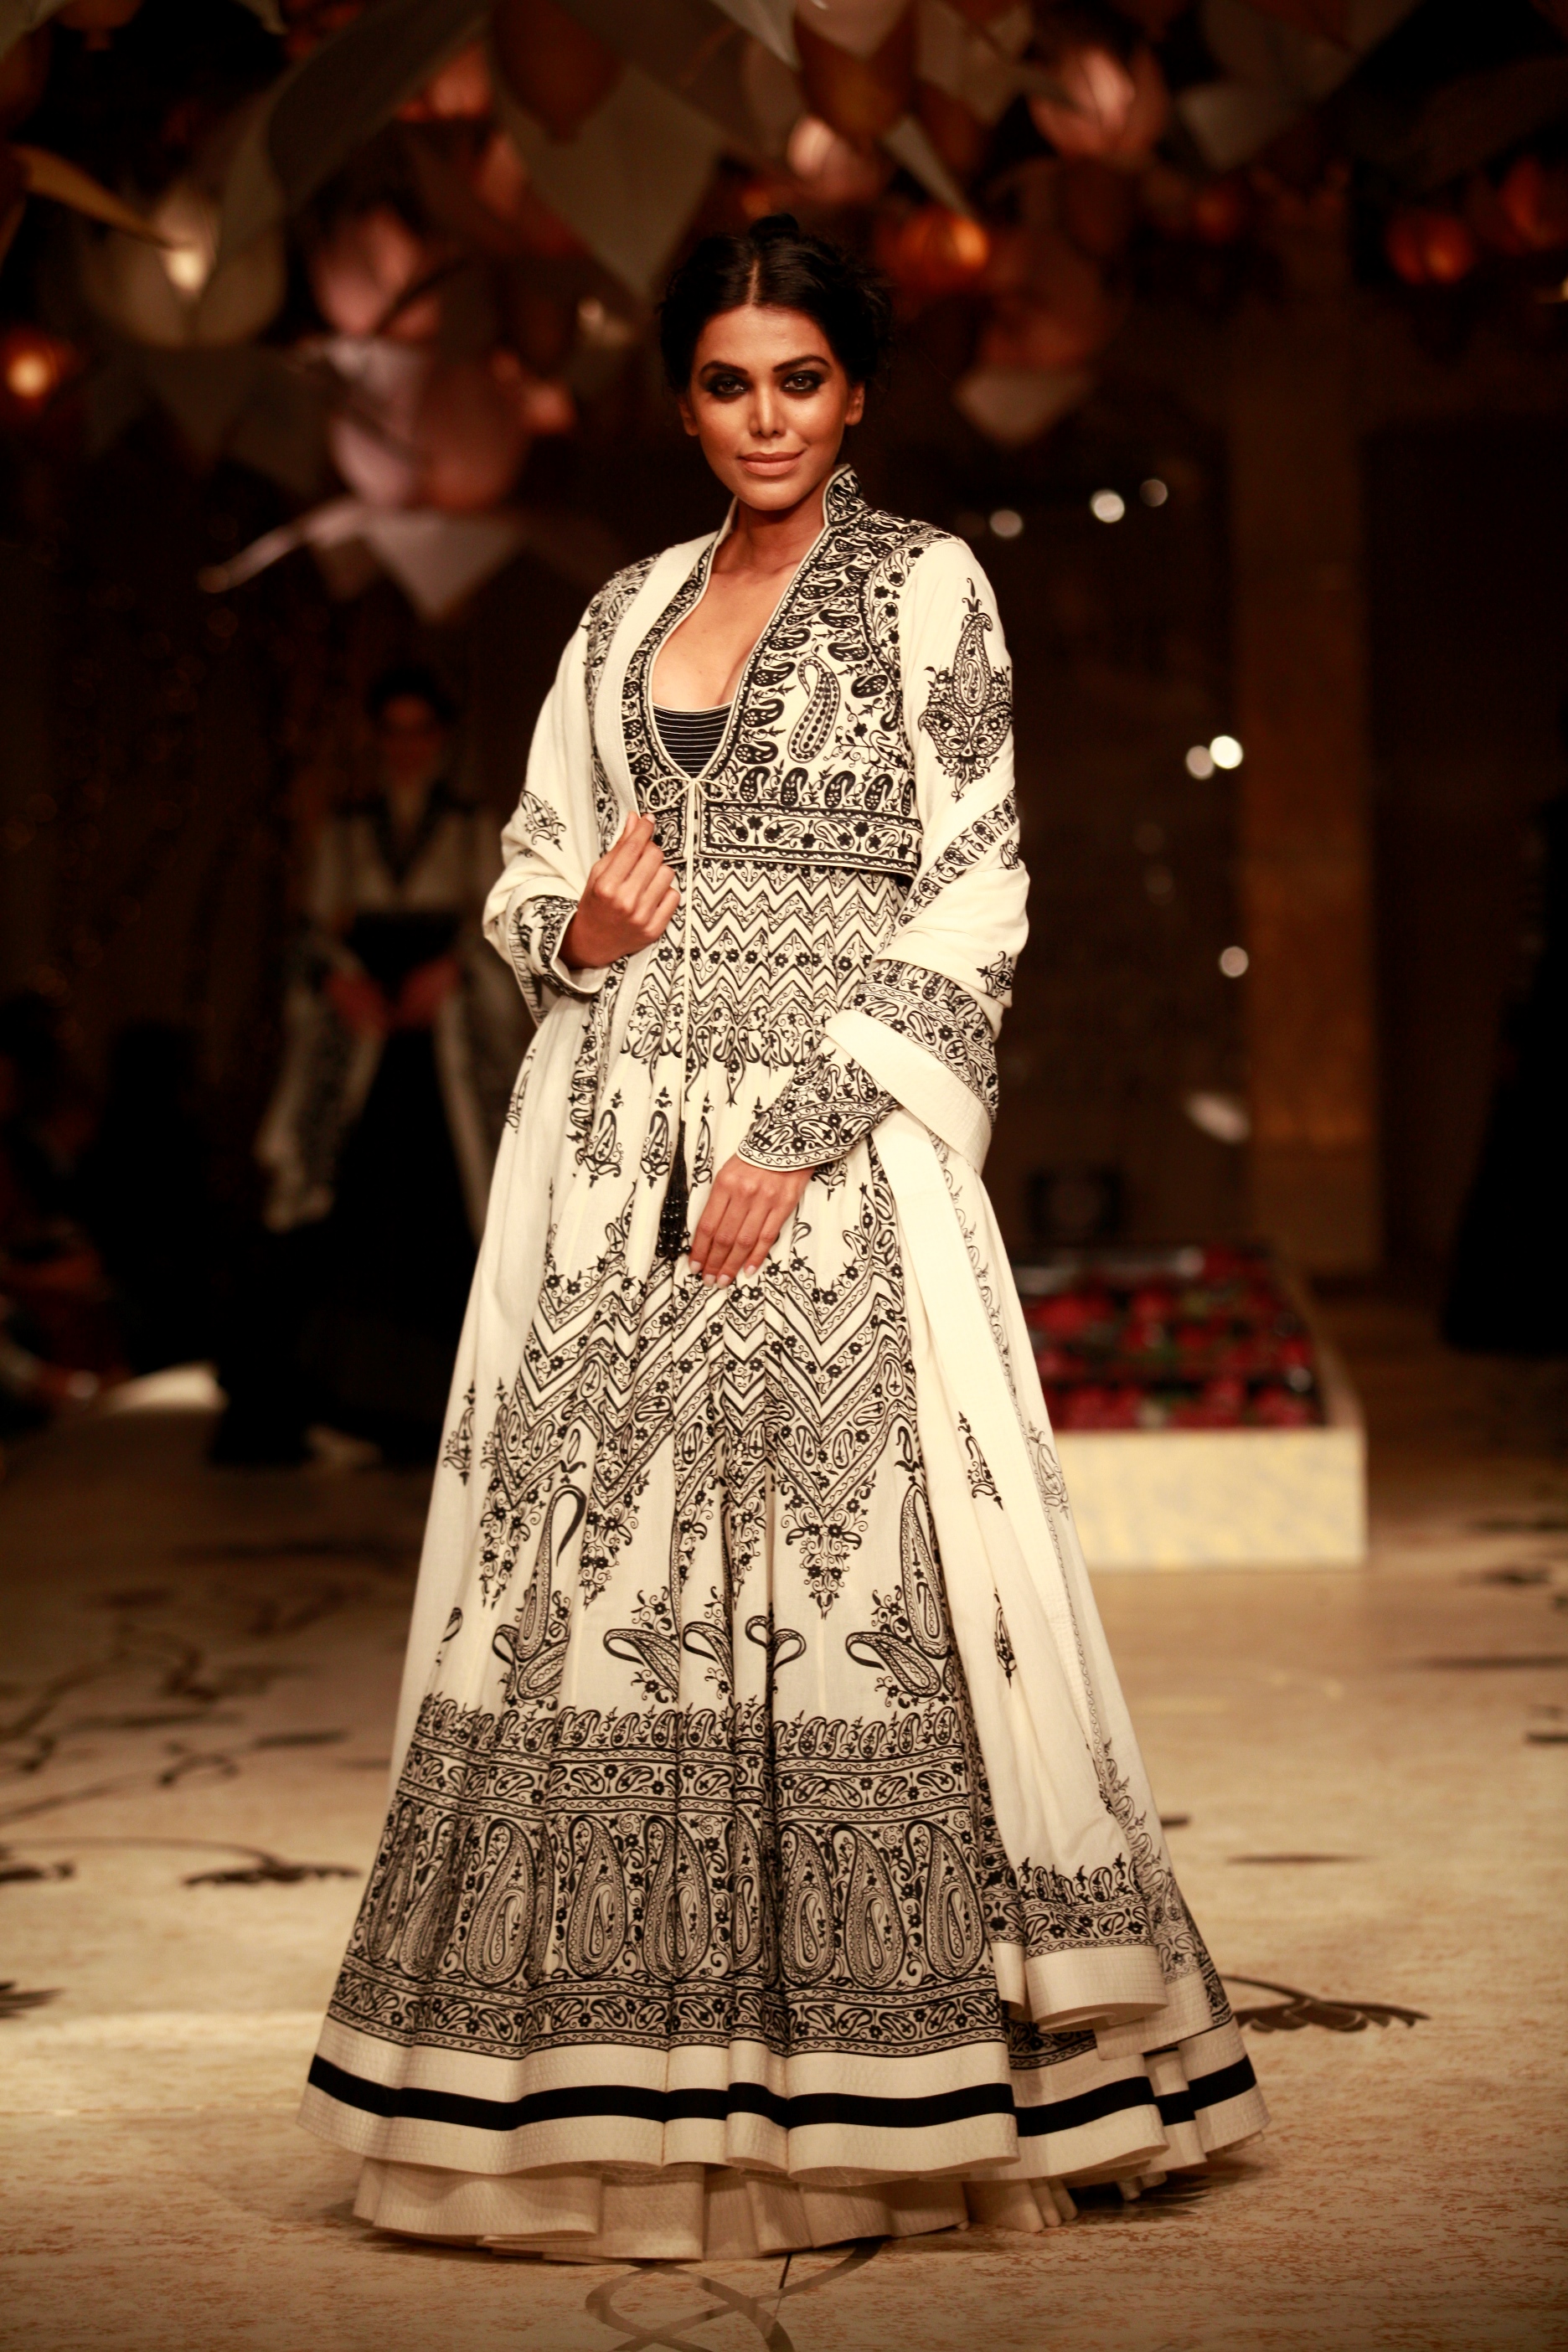 Seen at Aamby Valley India Bridal Fashion Week - Model walking for Rohit Bal (2)